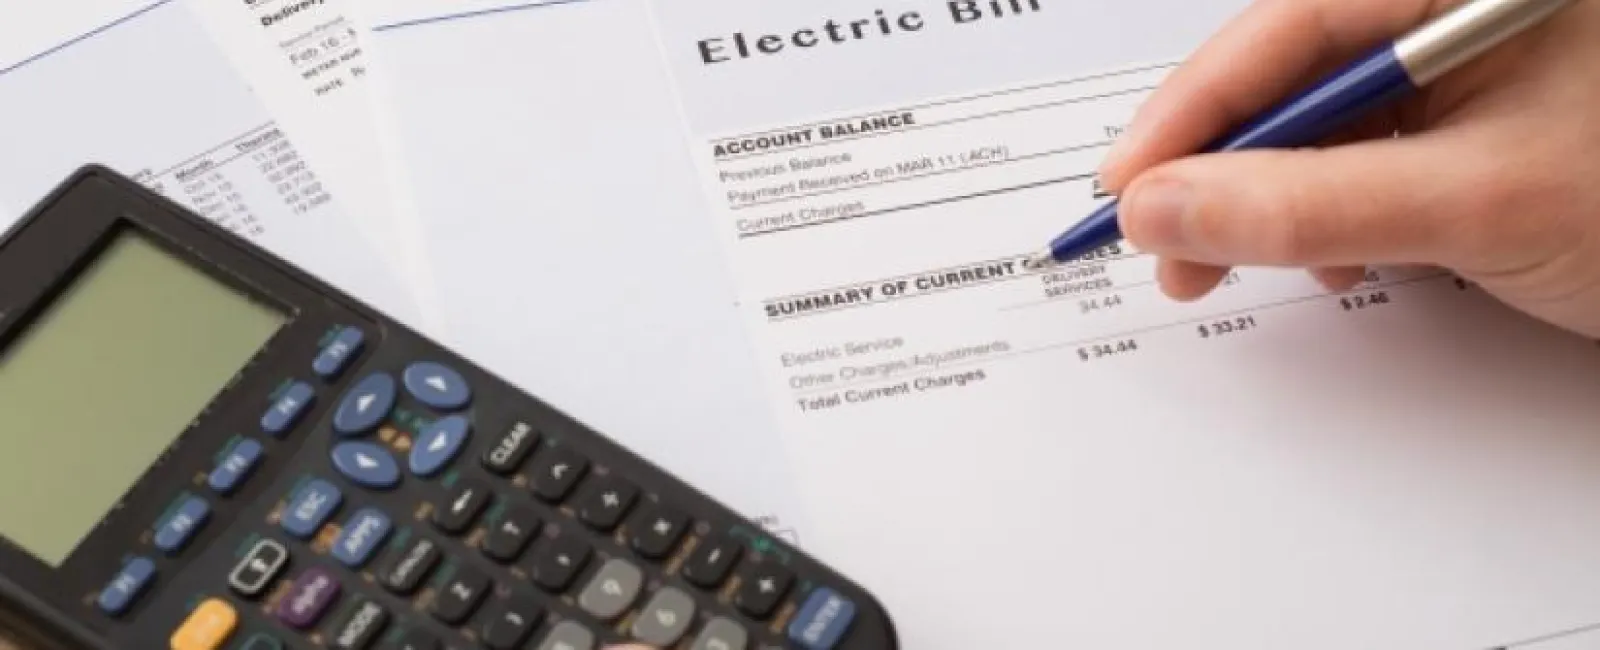 Common Questions About How to Save on Electric Bills